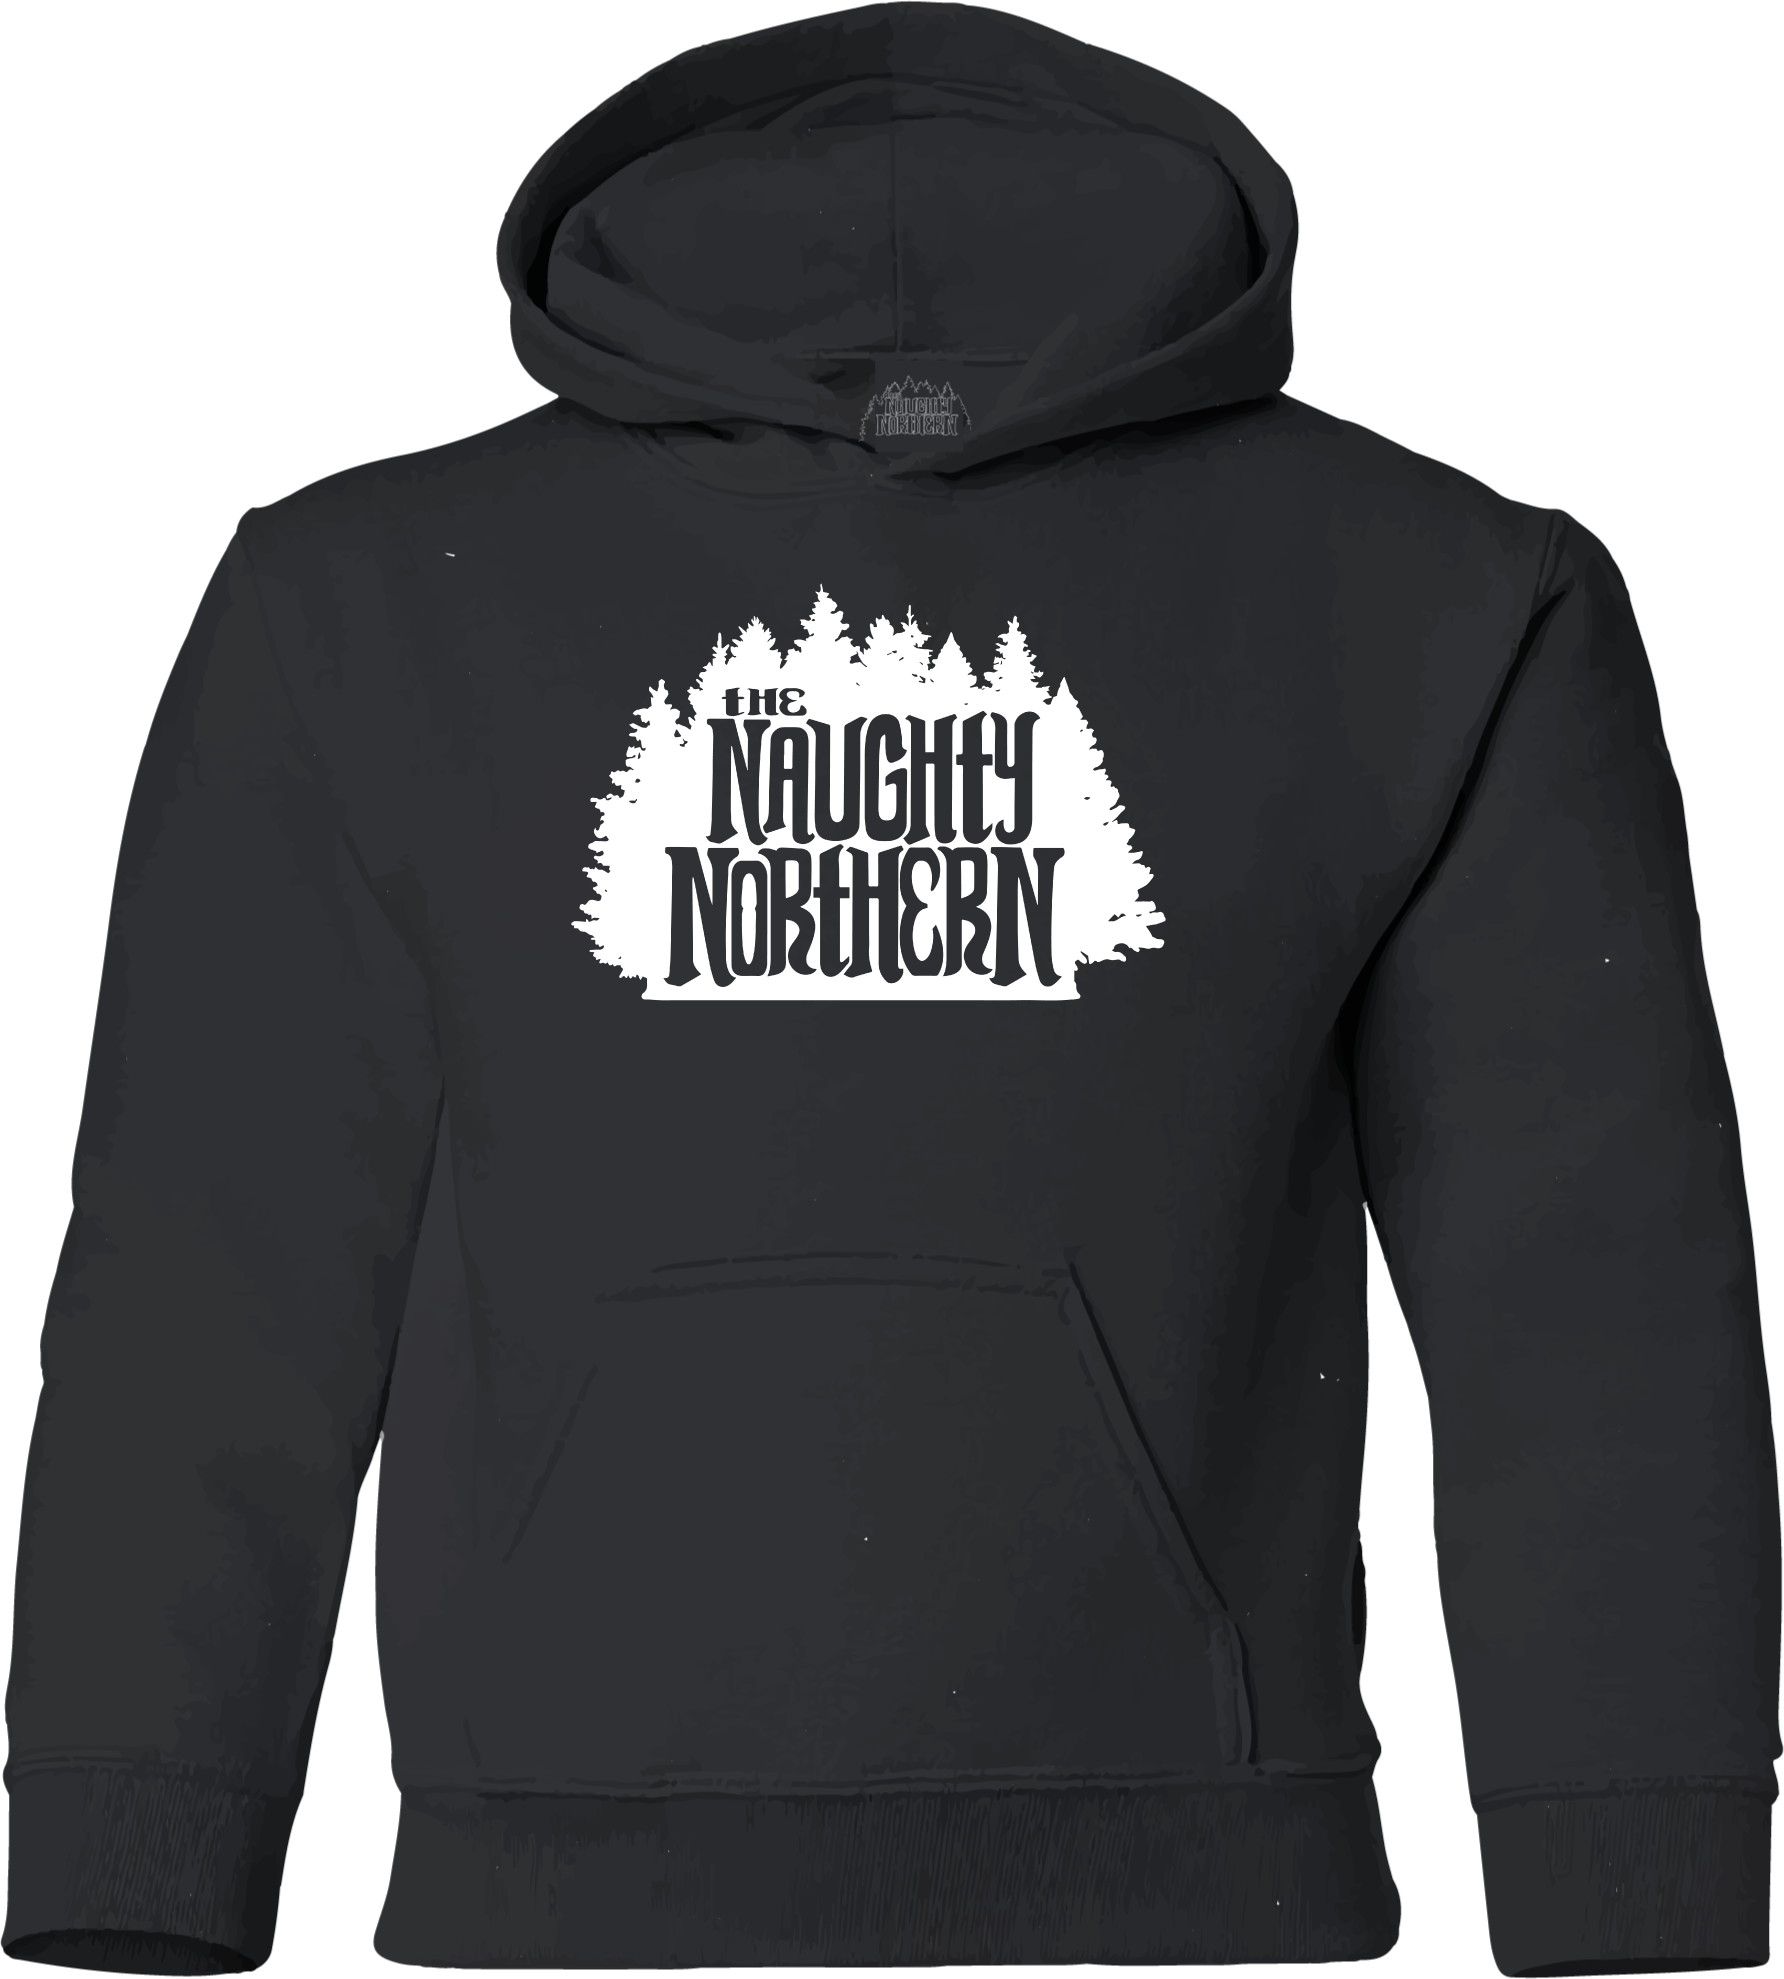 Youth Hoodie GLOW-IN -DARK The Naughty Northern